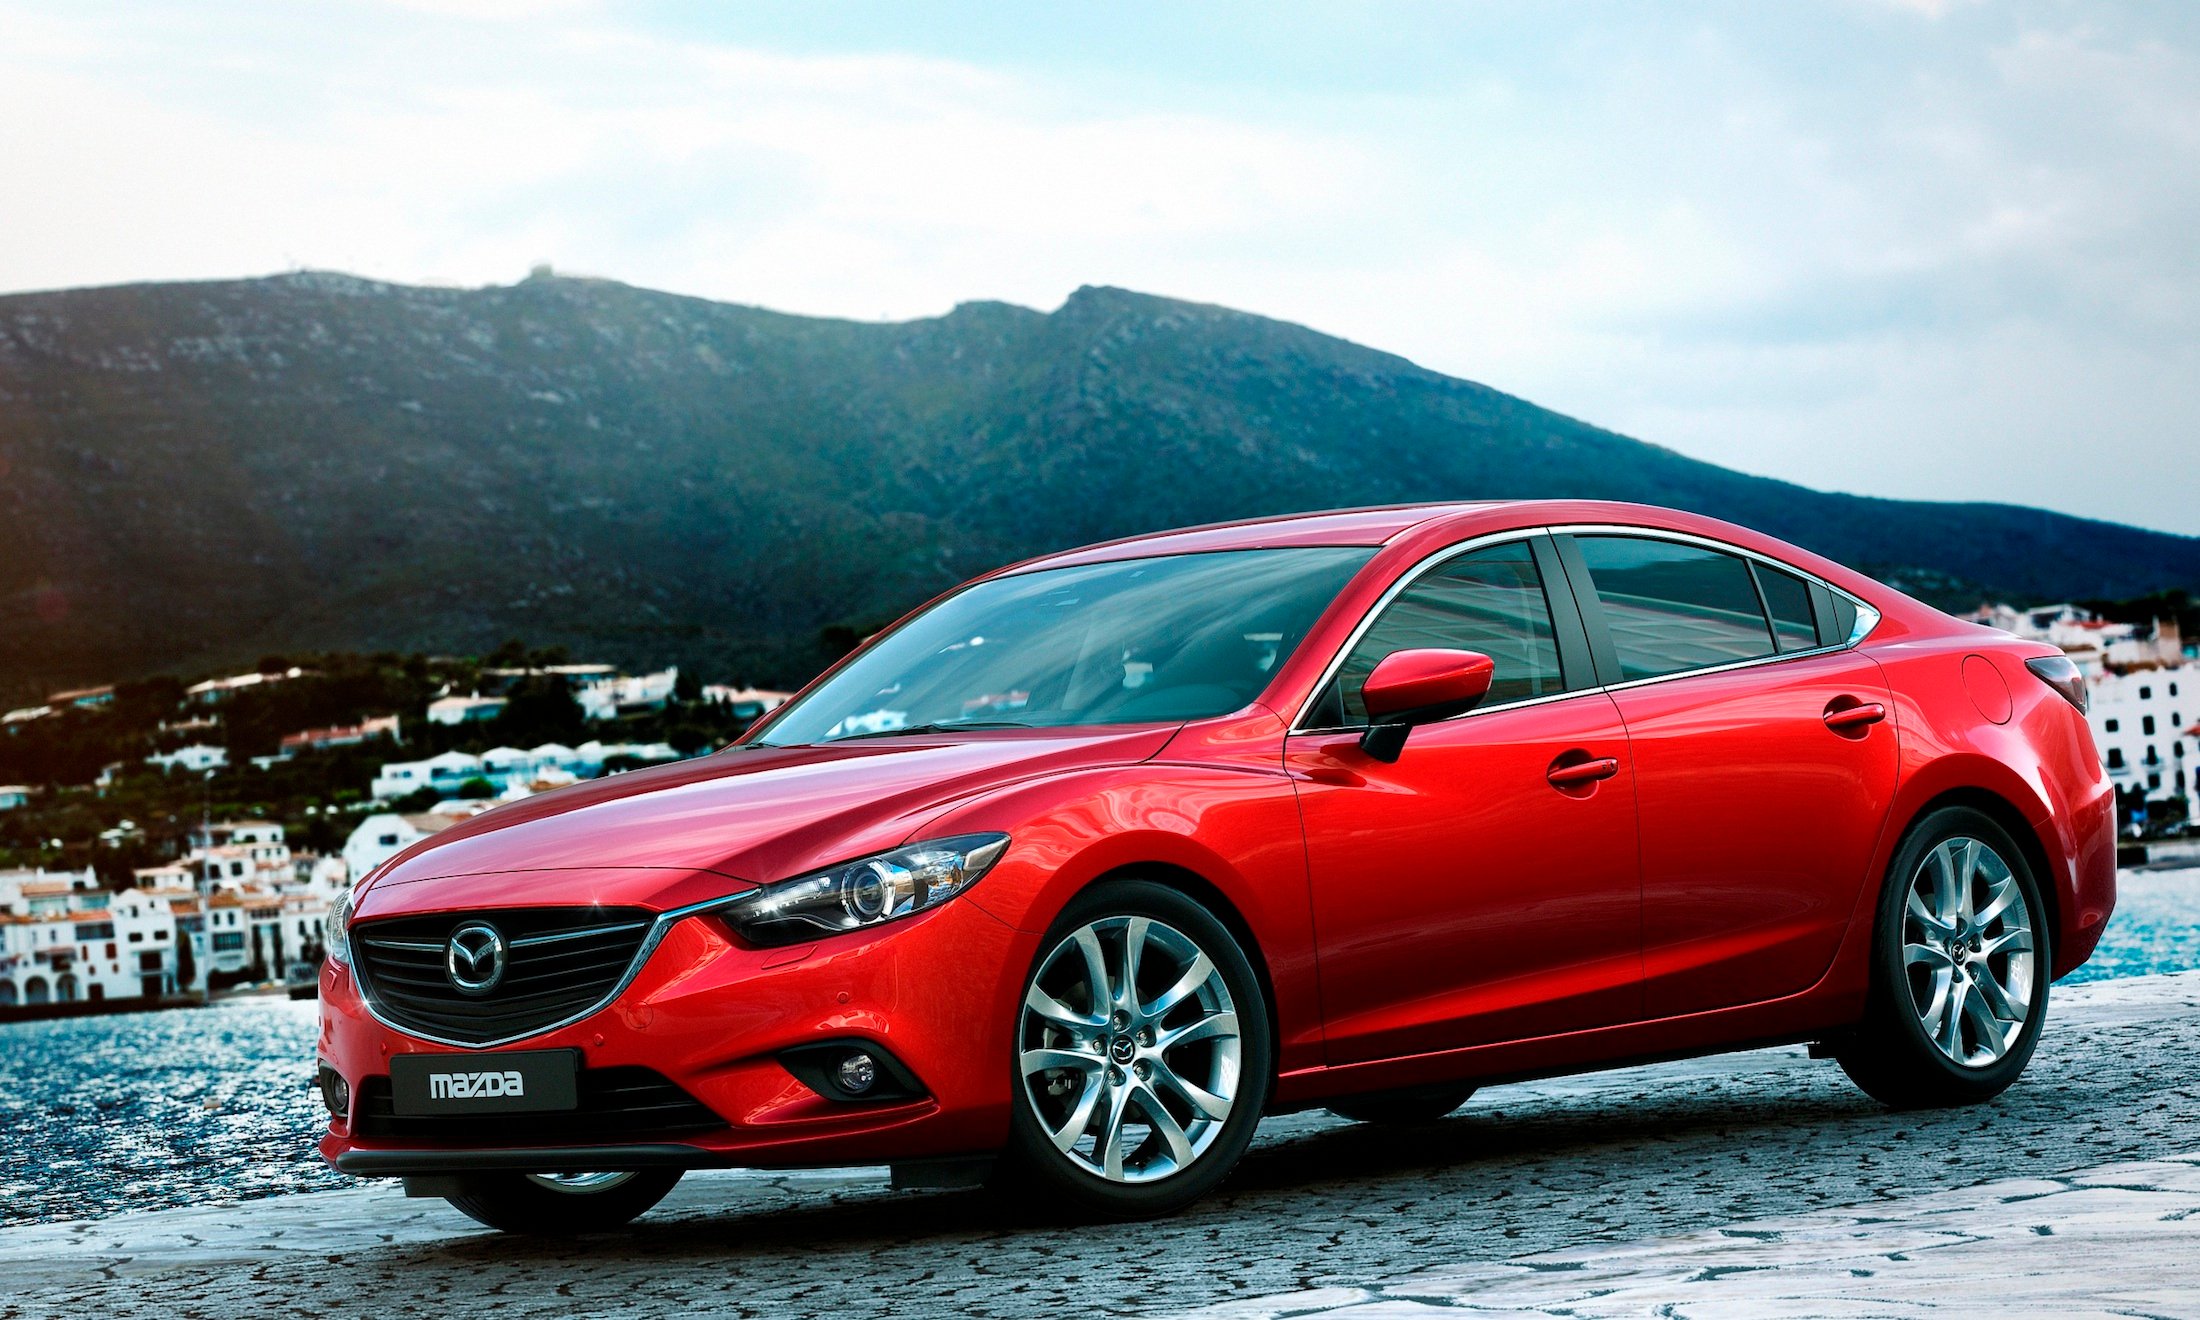 2013 Mazda6 official pictures and details Photos (1 of 13)